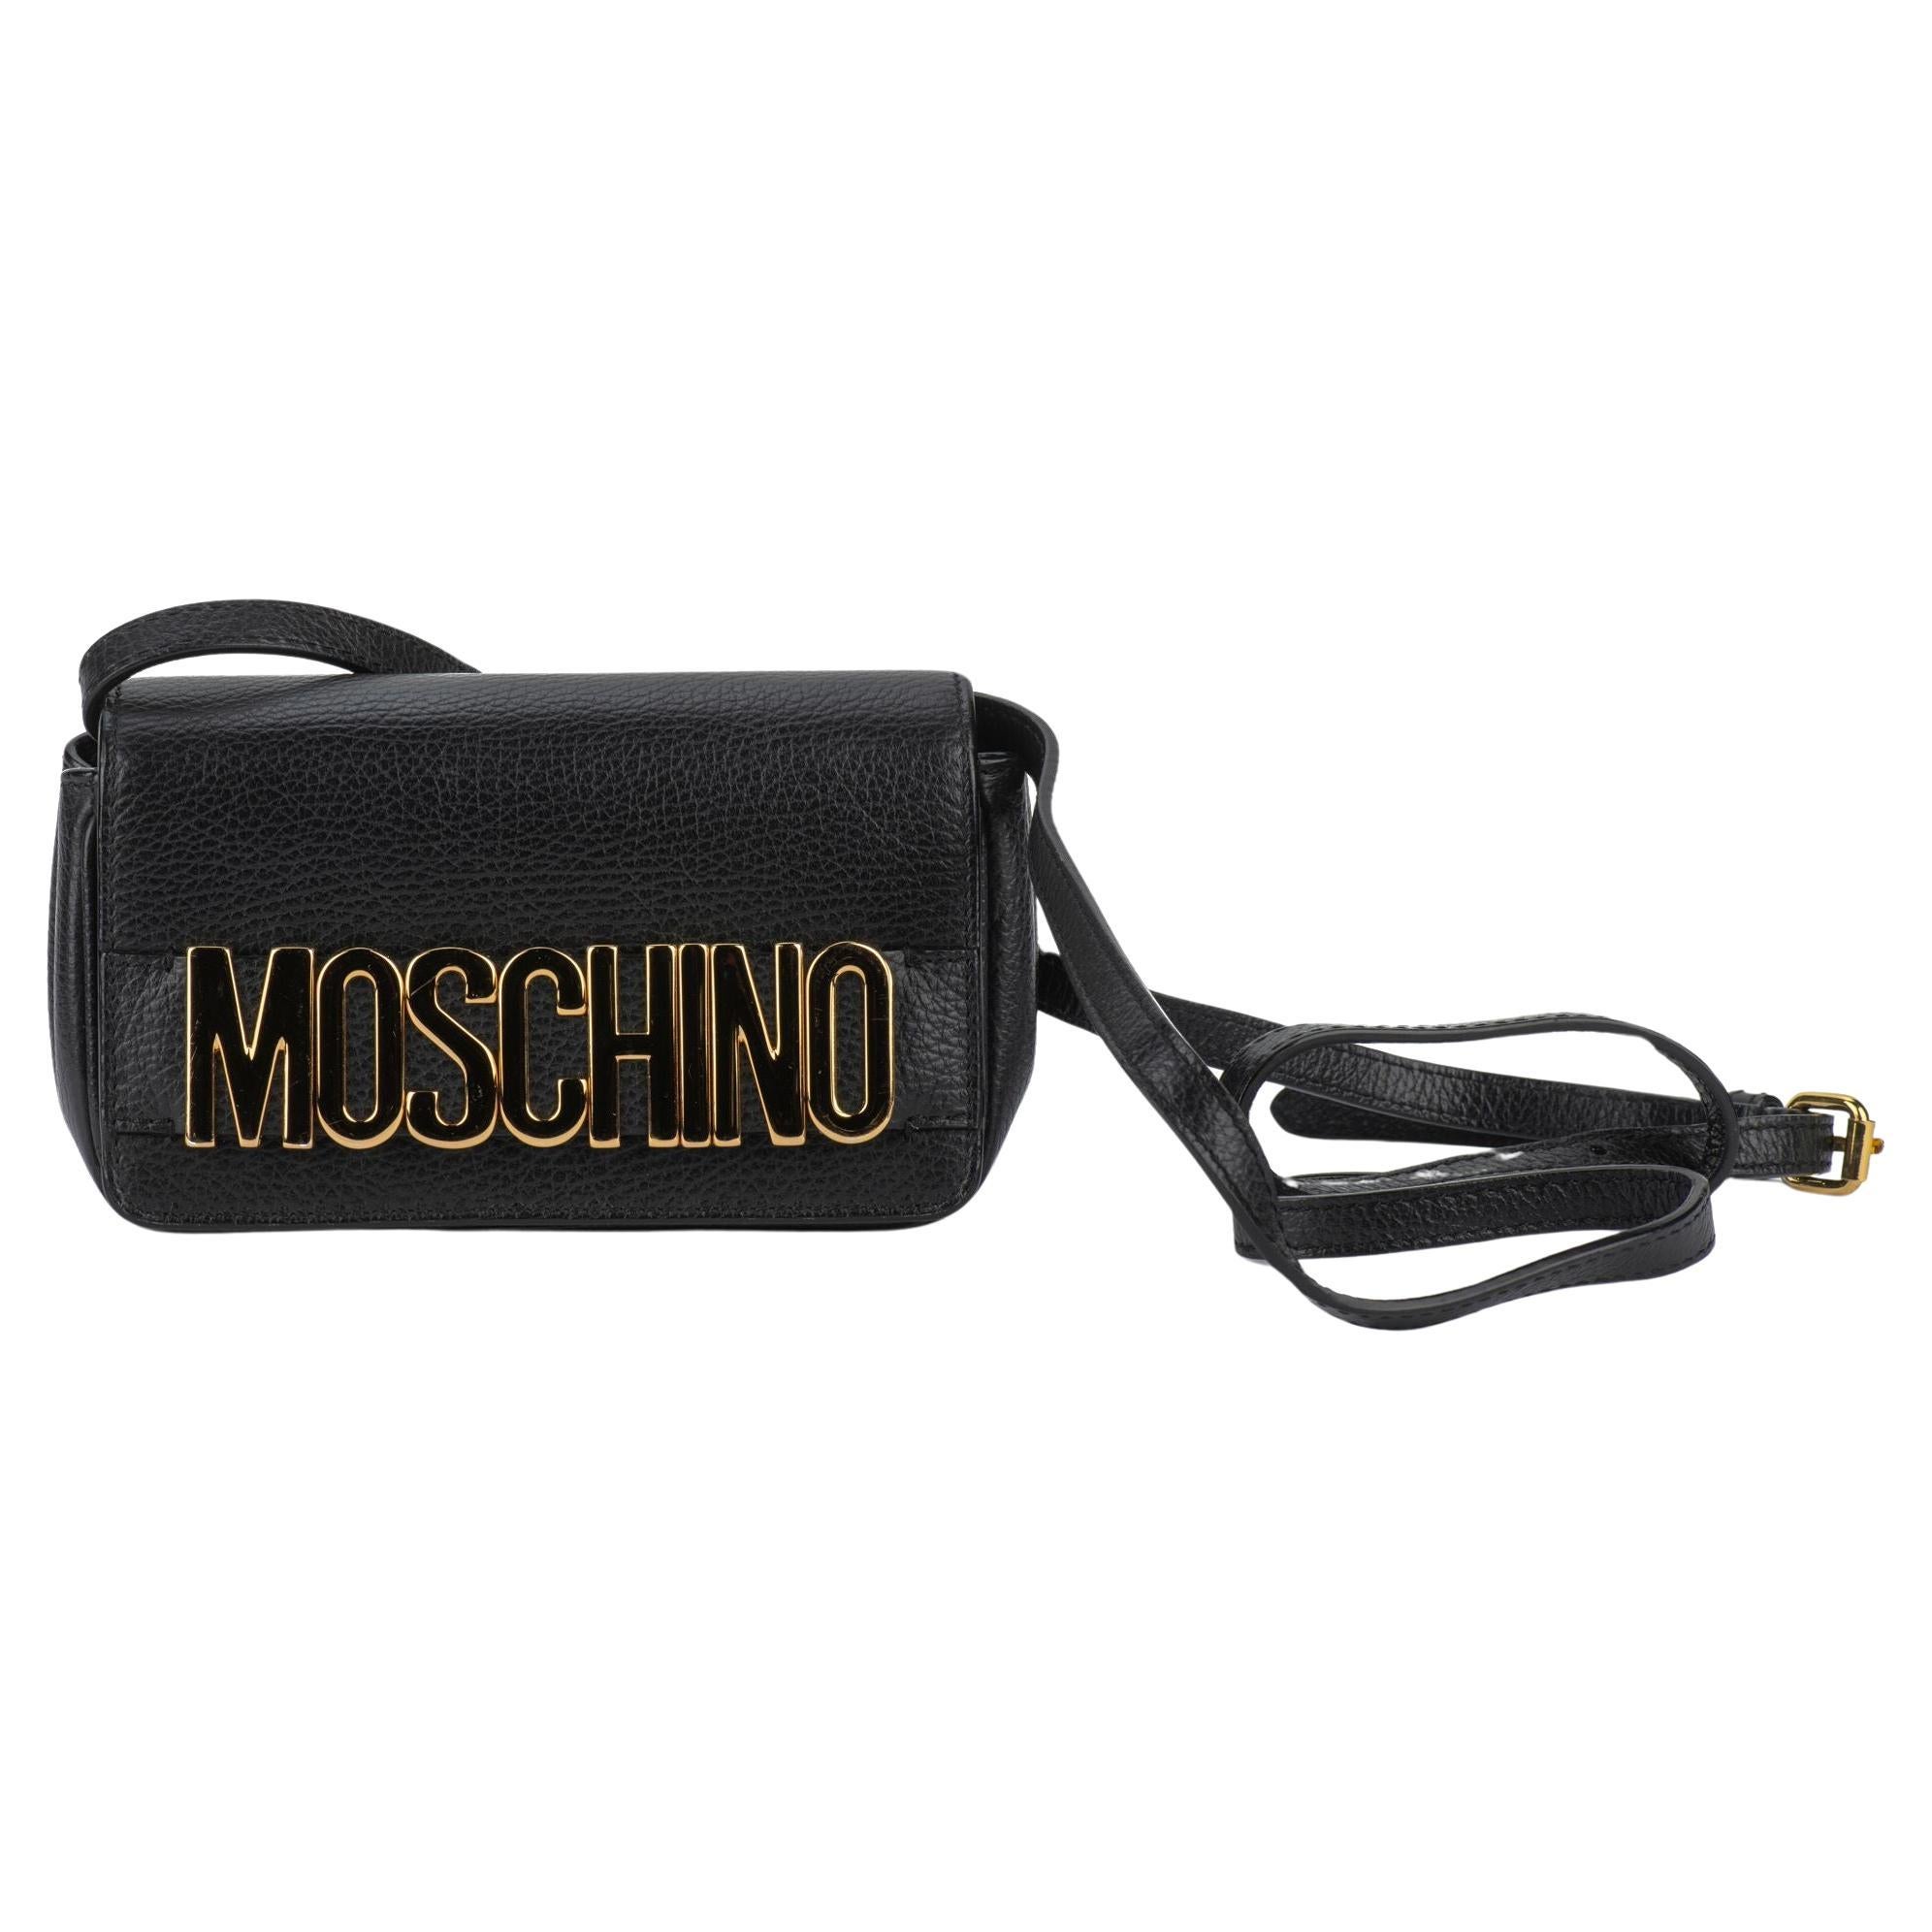 Moschino Black Lettering Cross Body Bag For Sale